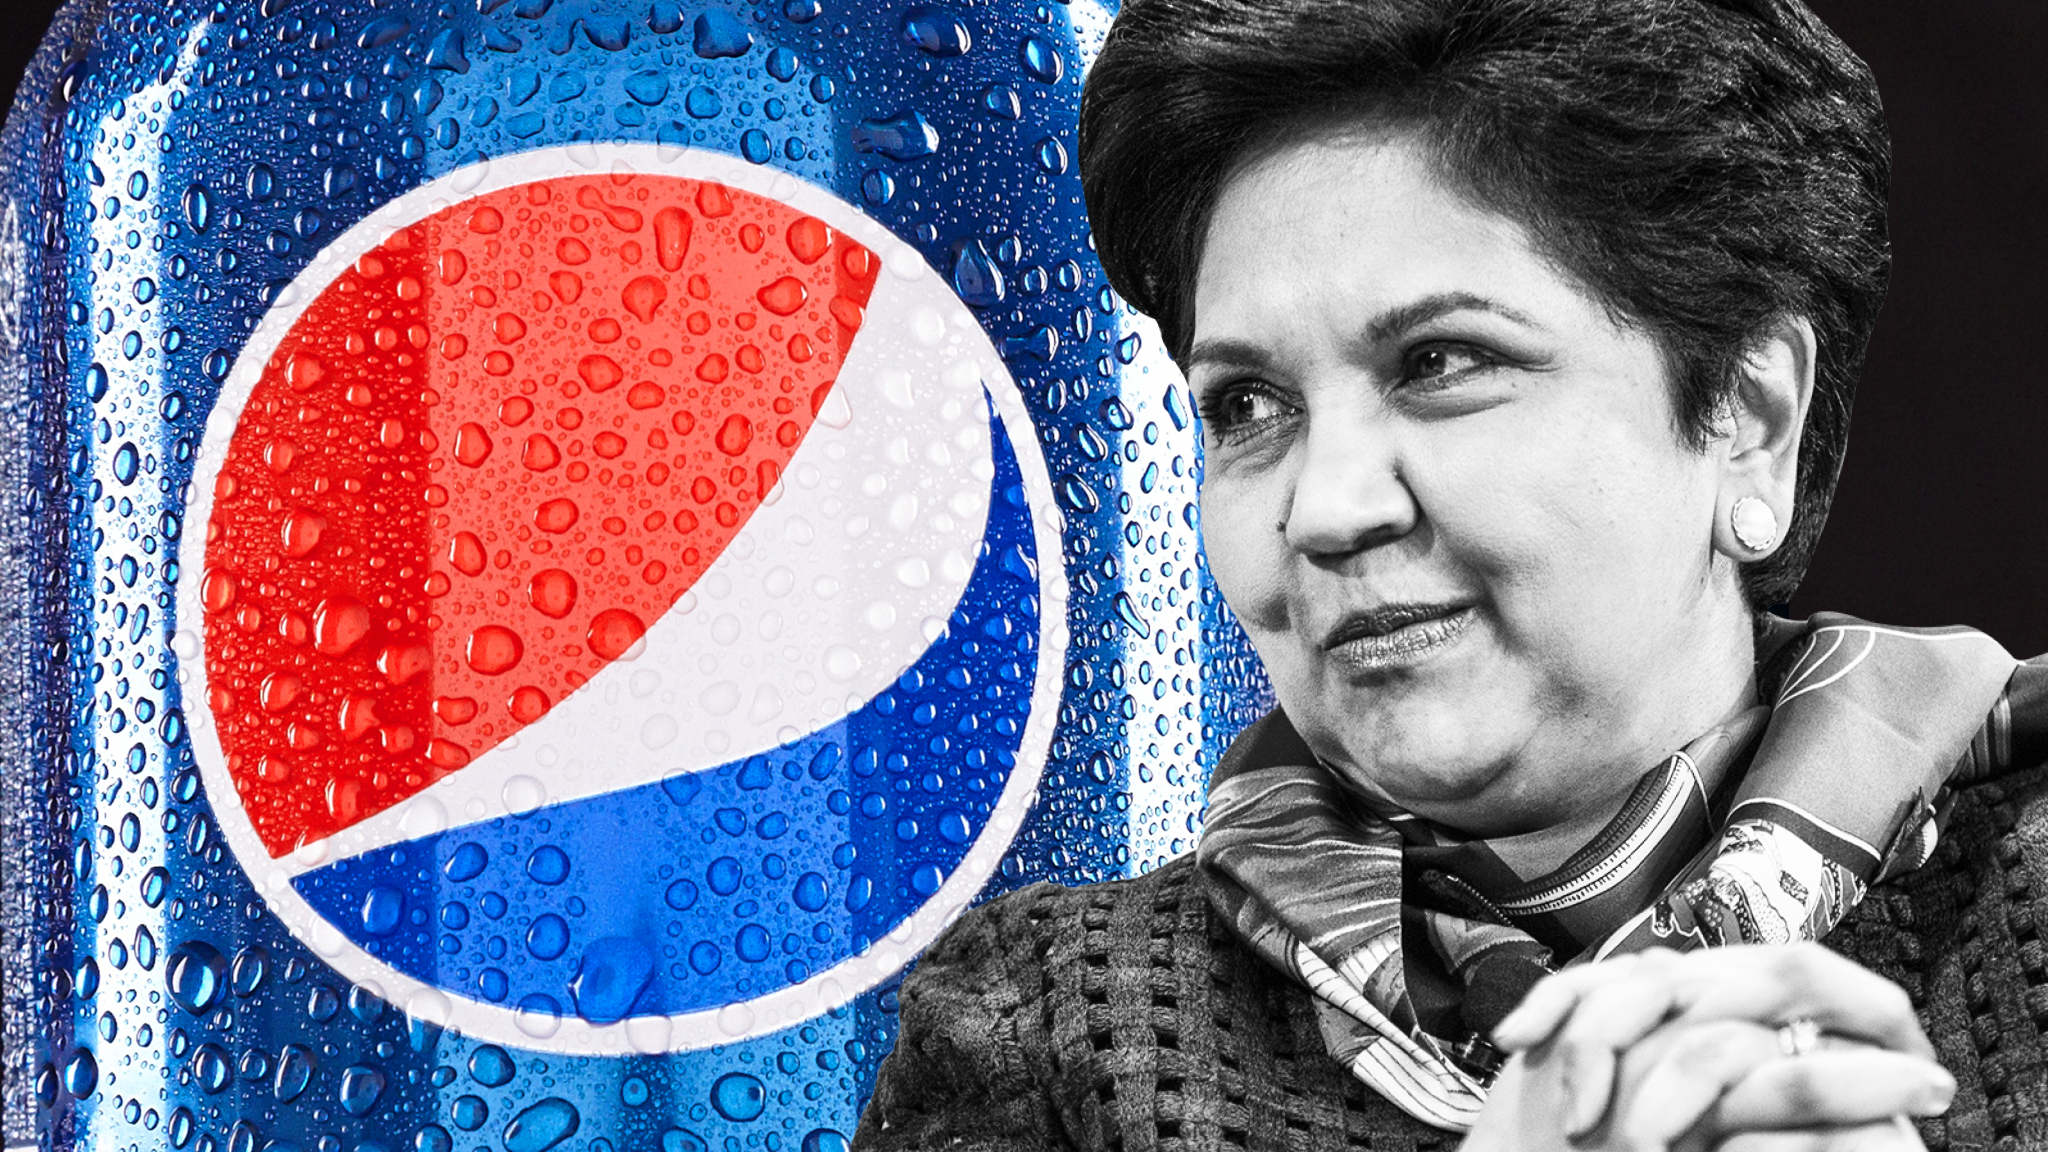 Nooyi leaves Pepsi after trying to shape healthier future